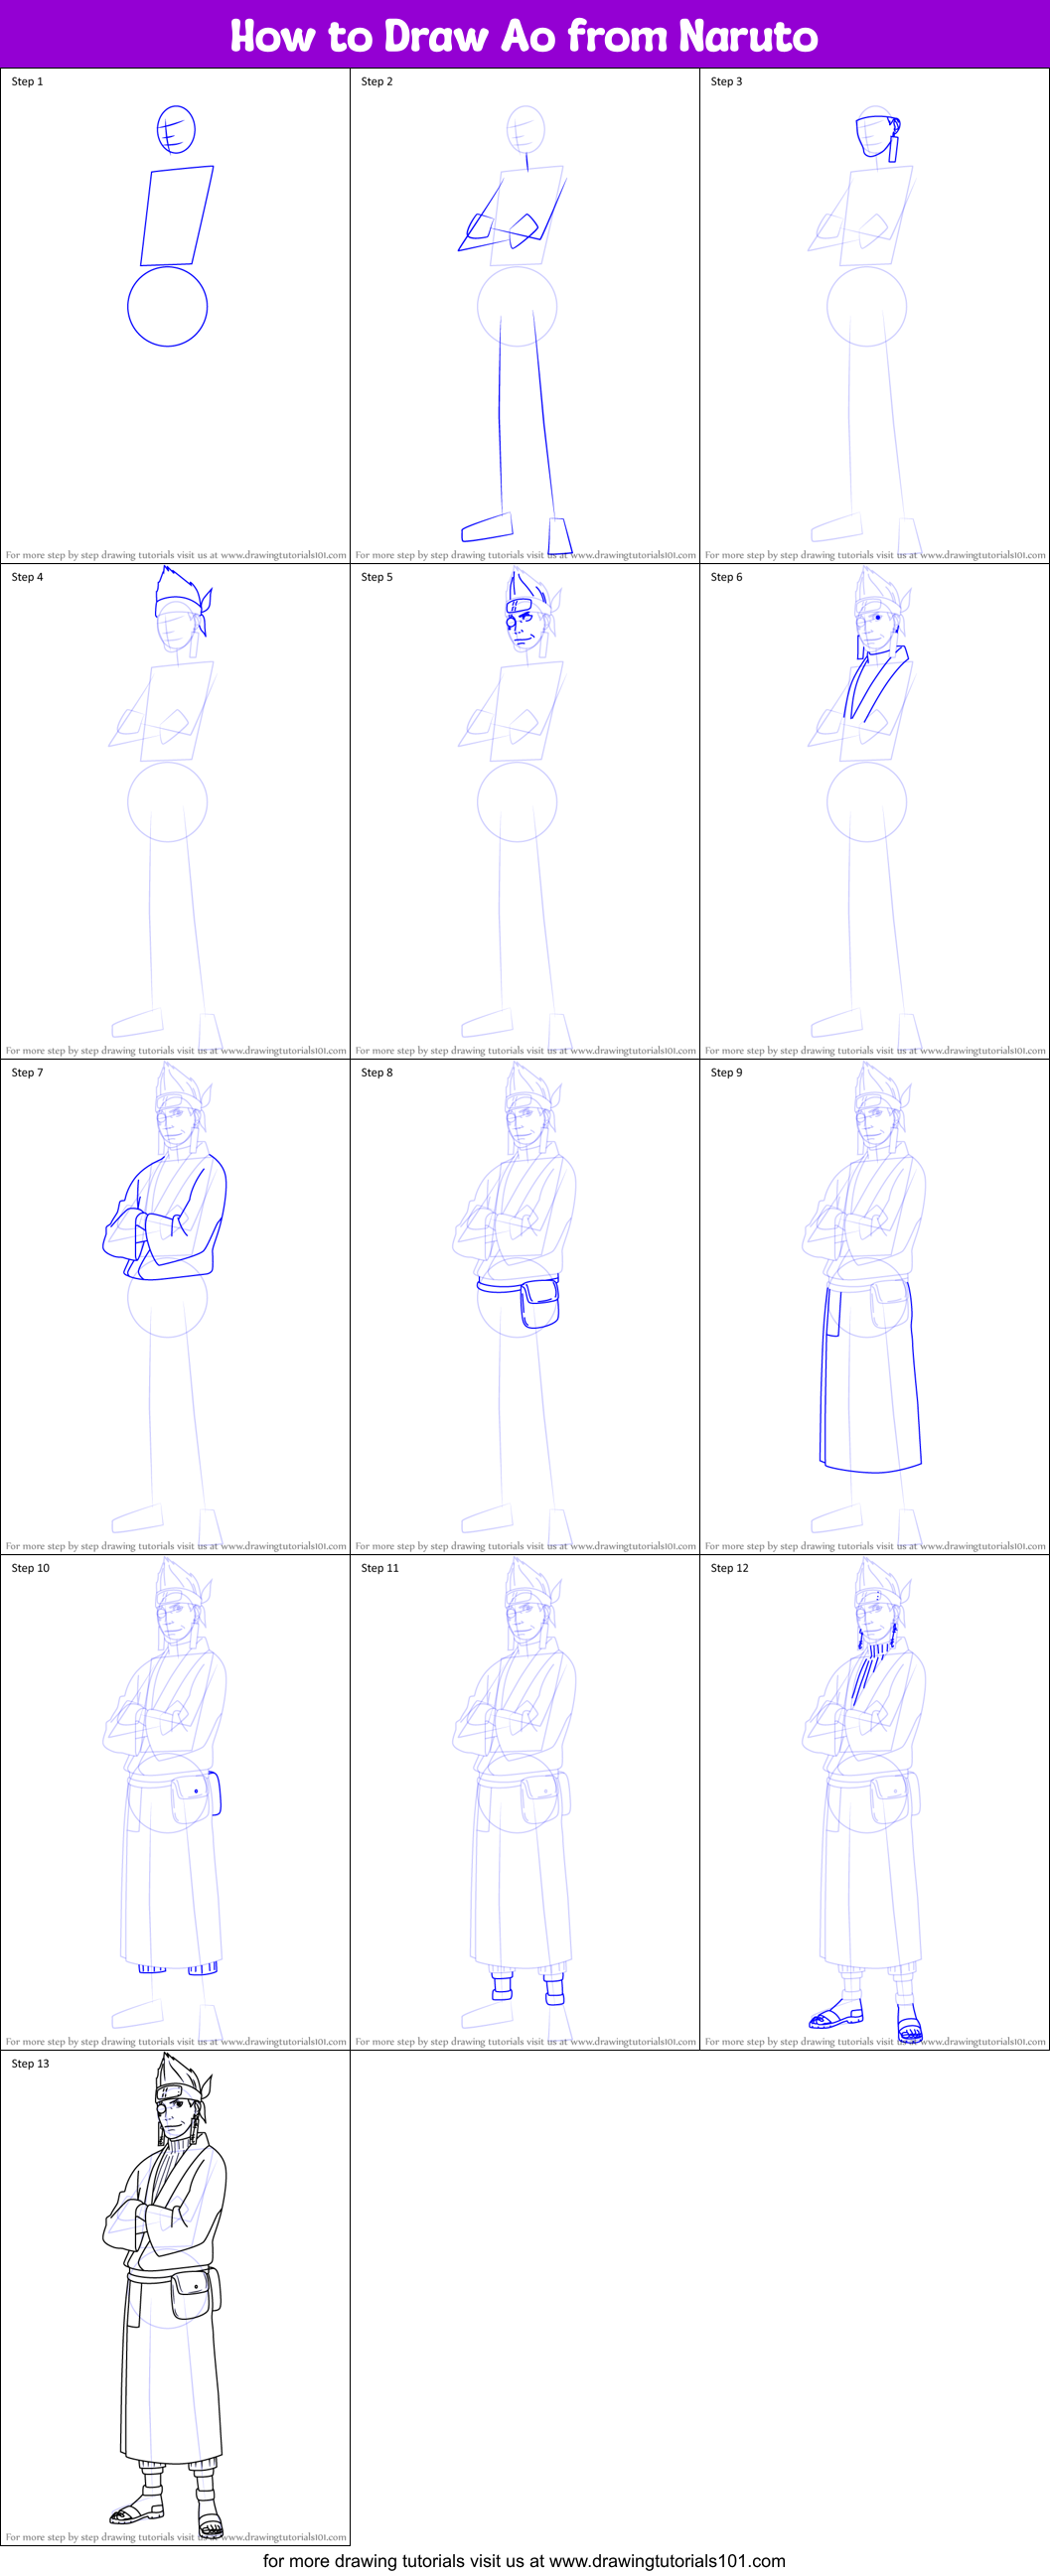 How to Draw Ao from Naruto printable step by step drawing sheet